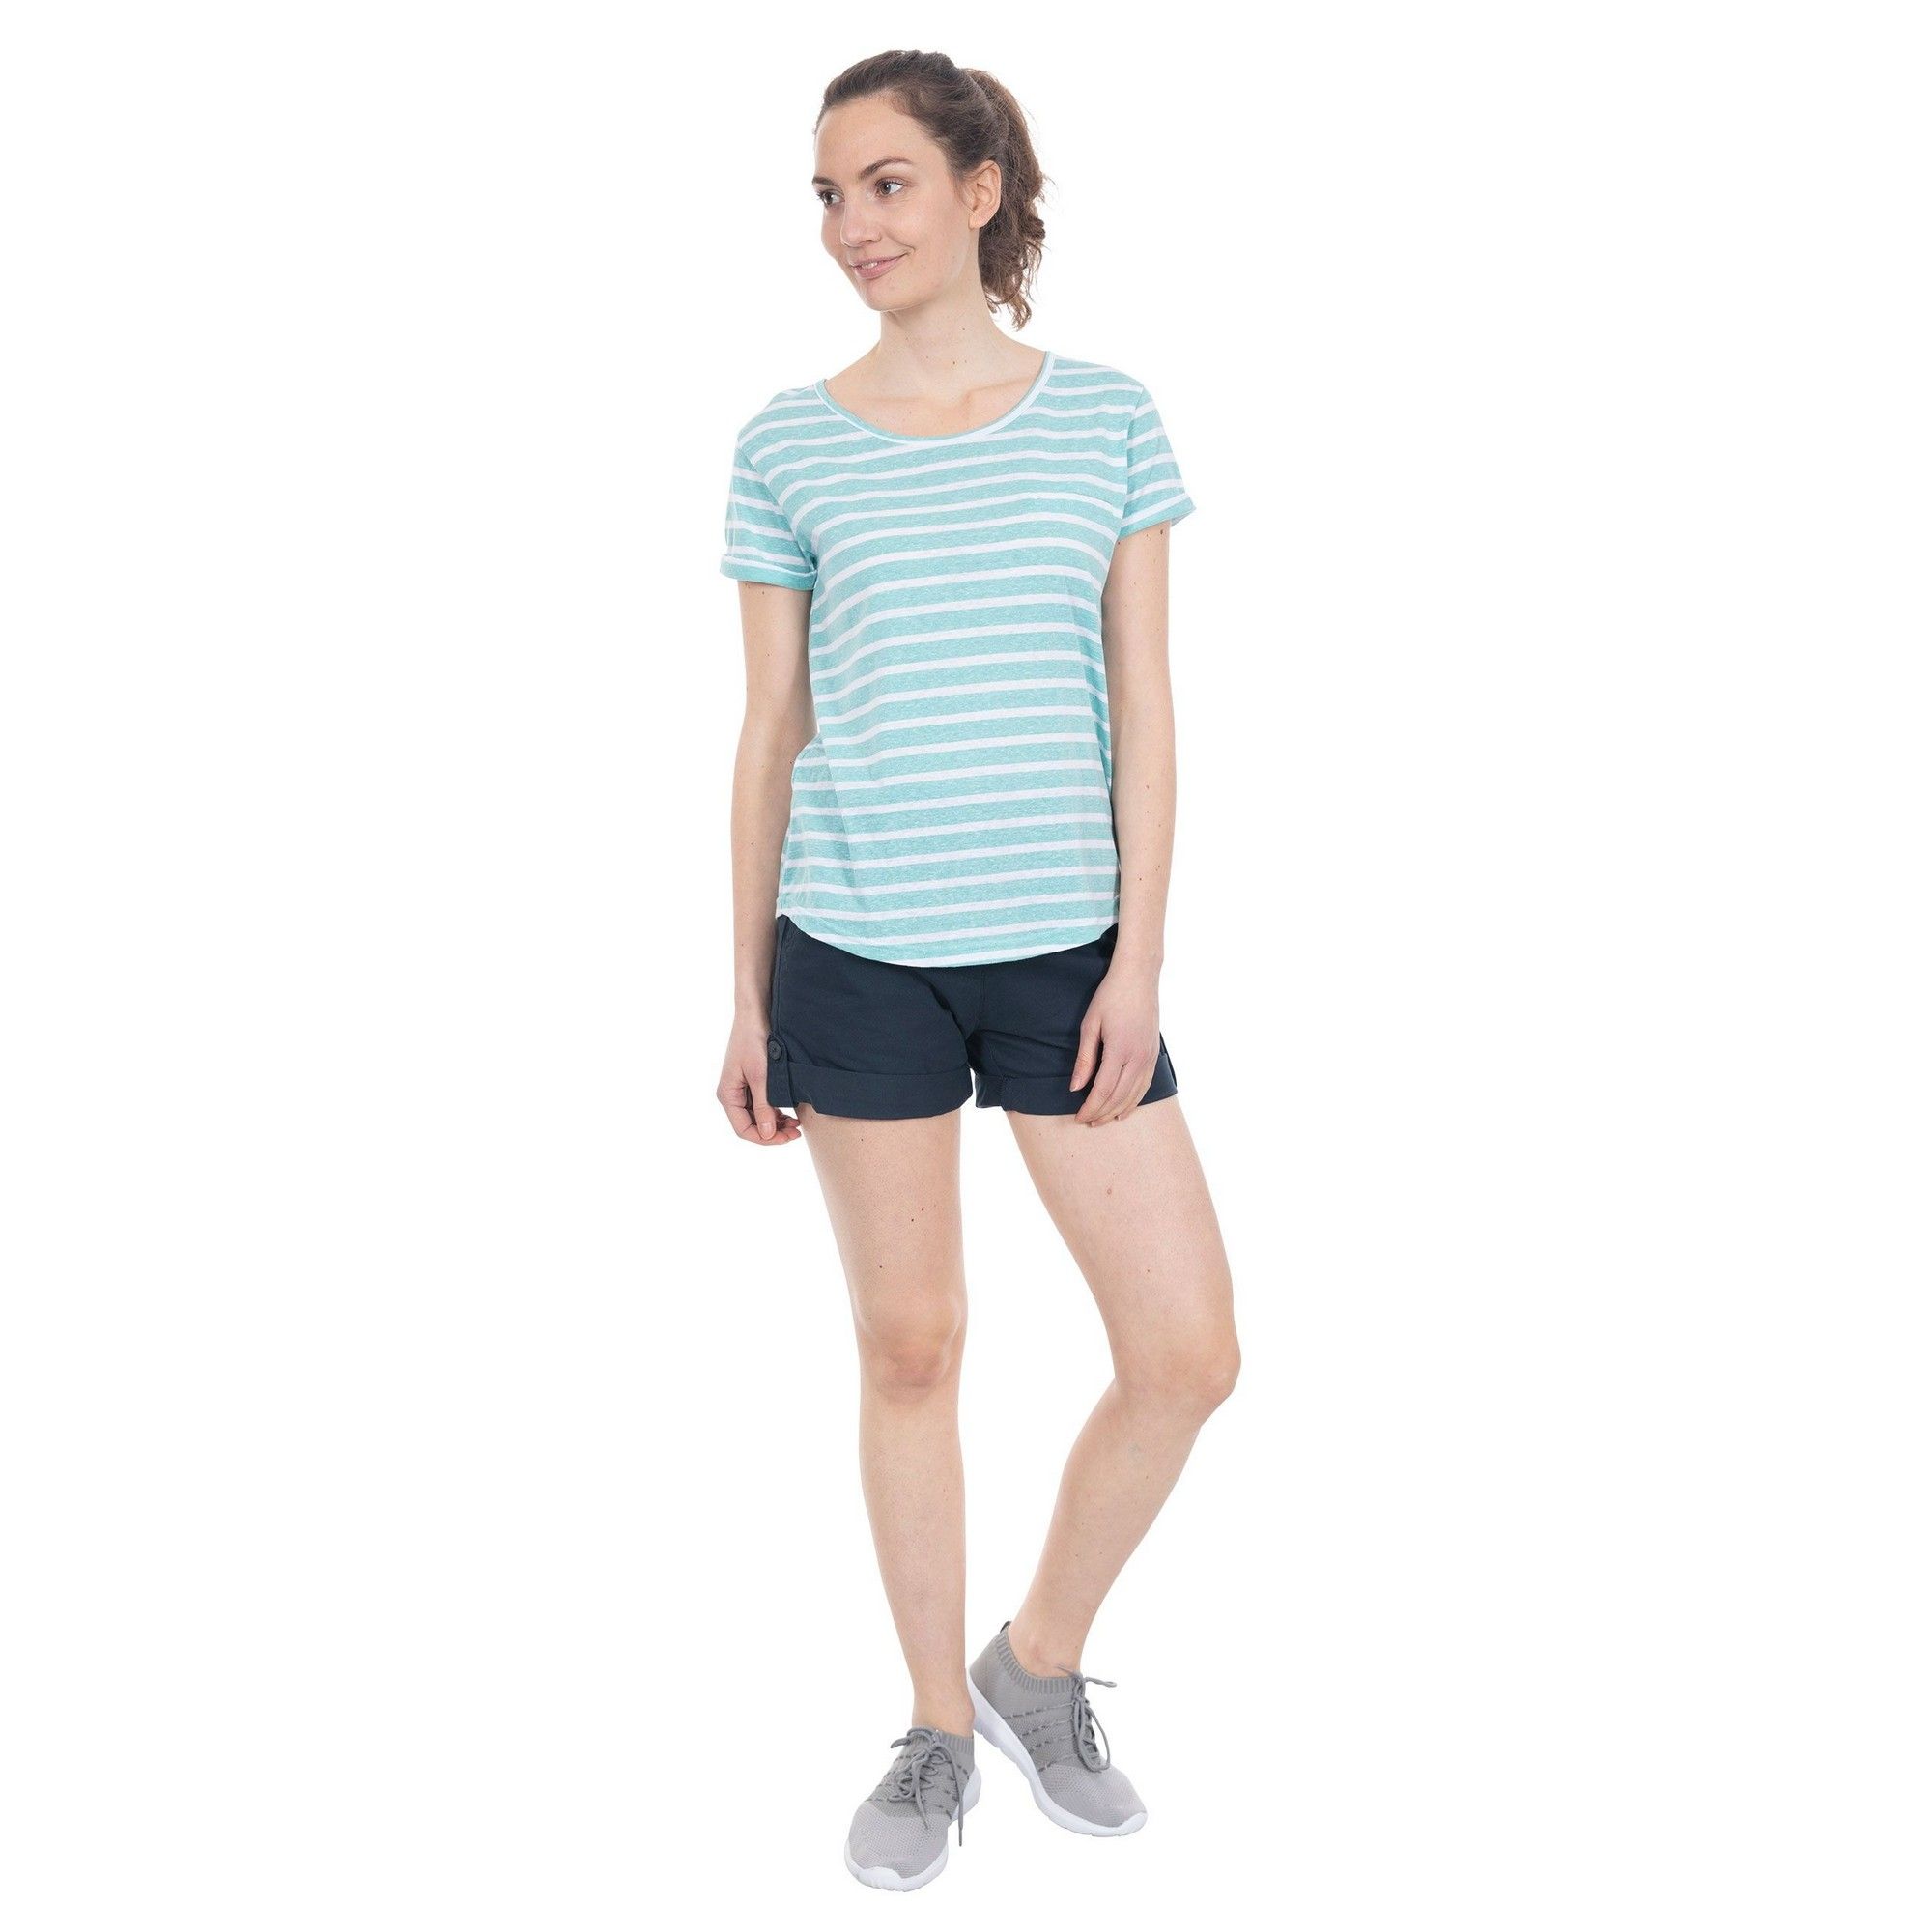 Short sleeved t-shirt with small mock welt pocket. Sleeve hem turn up. Curved hem shape. 50% polyester, 38% cotton, 12% viscose. Trespass Womens Chest Sizing (approx): XS/8 - 32in/81cm, S/10 - 34in/86cm, M/12 - 36in/91.4cm, L/14 - 38in/96.5cm, XL/16 - 40in/101.5cm, XXL/18 - 42in/106.5cm.